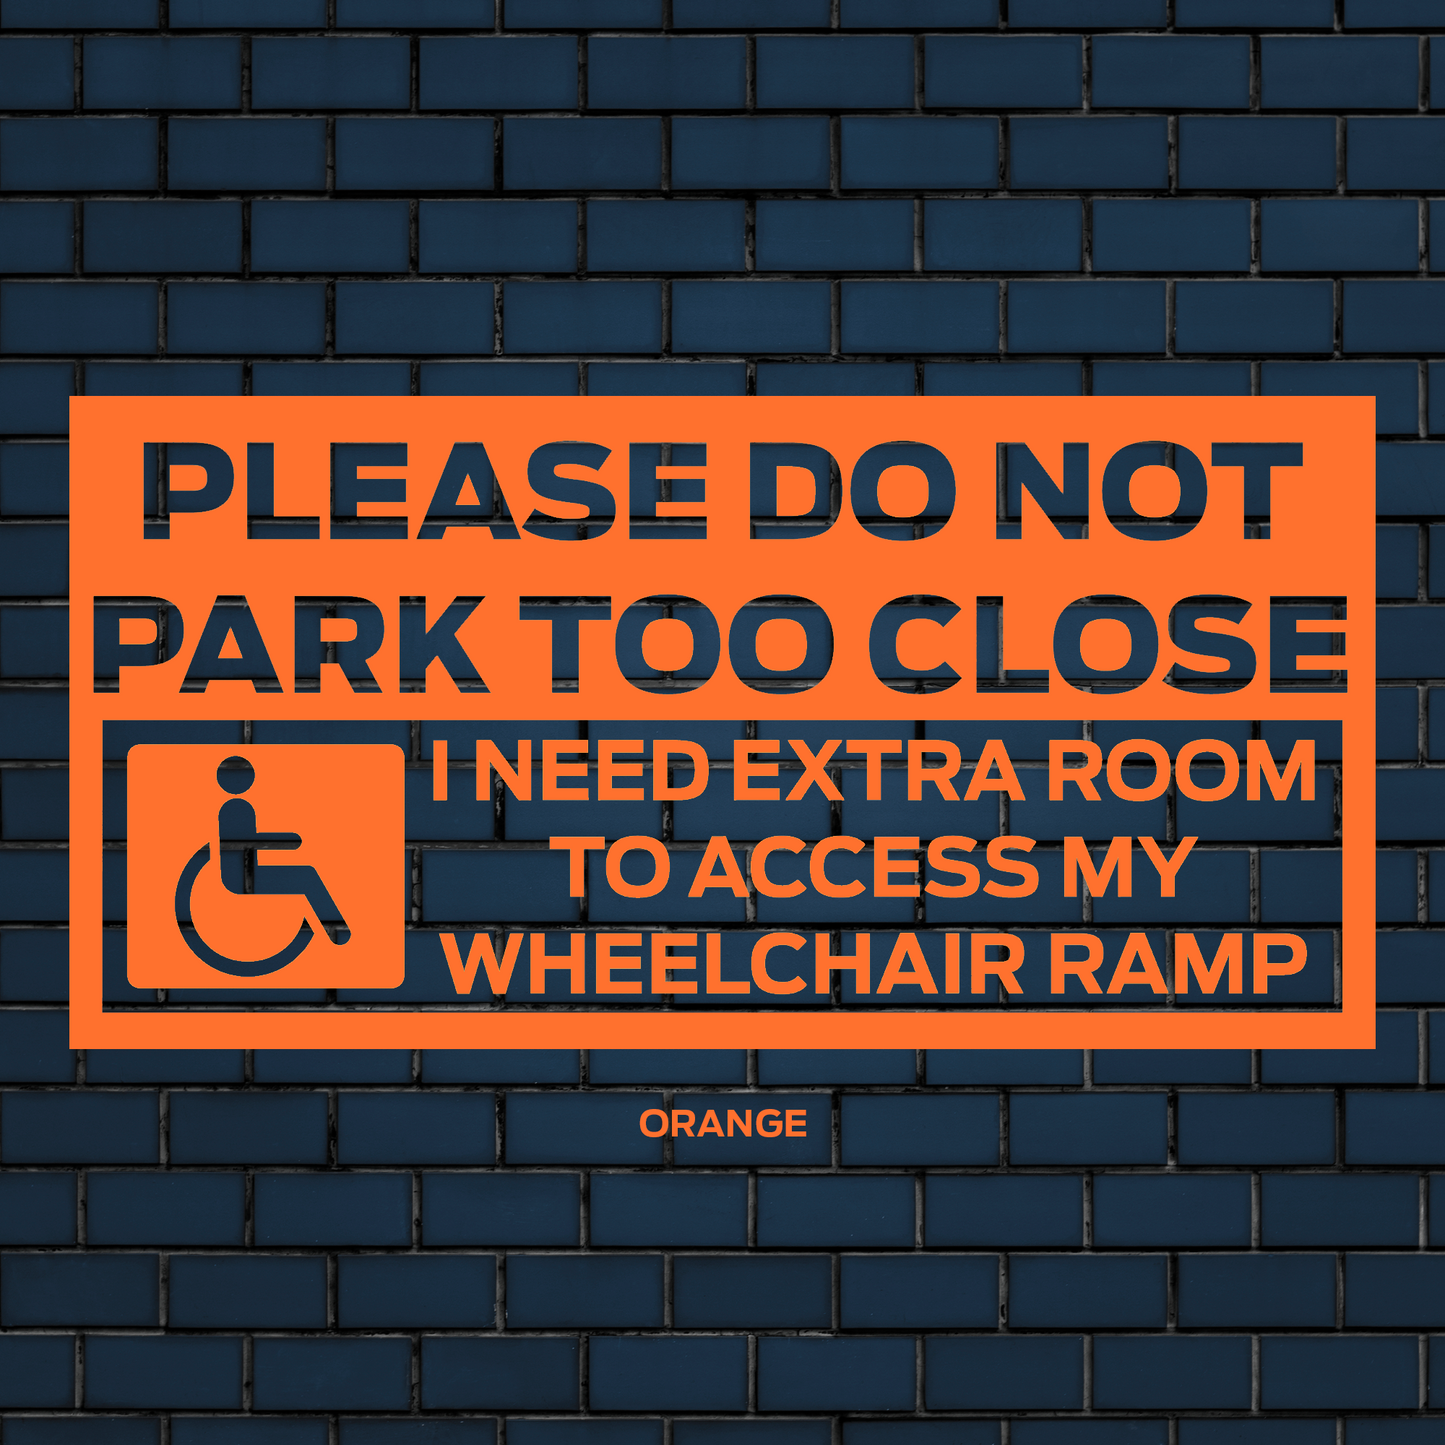 I need room to access my wheelchair ramp decal